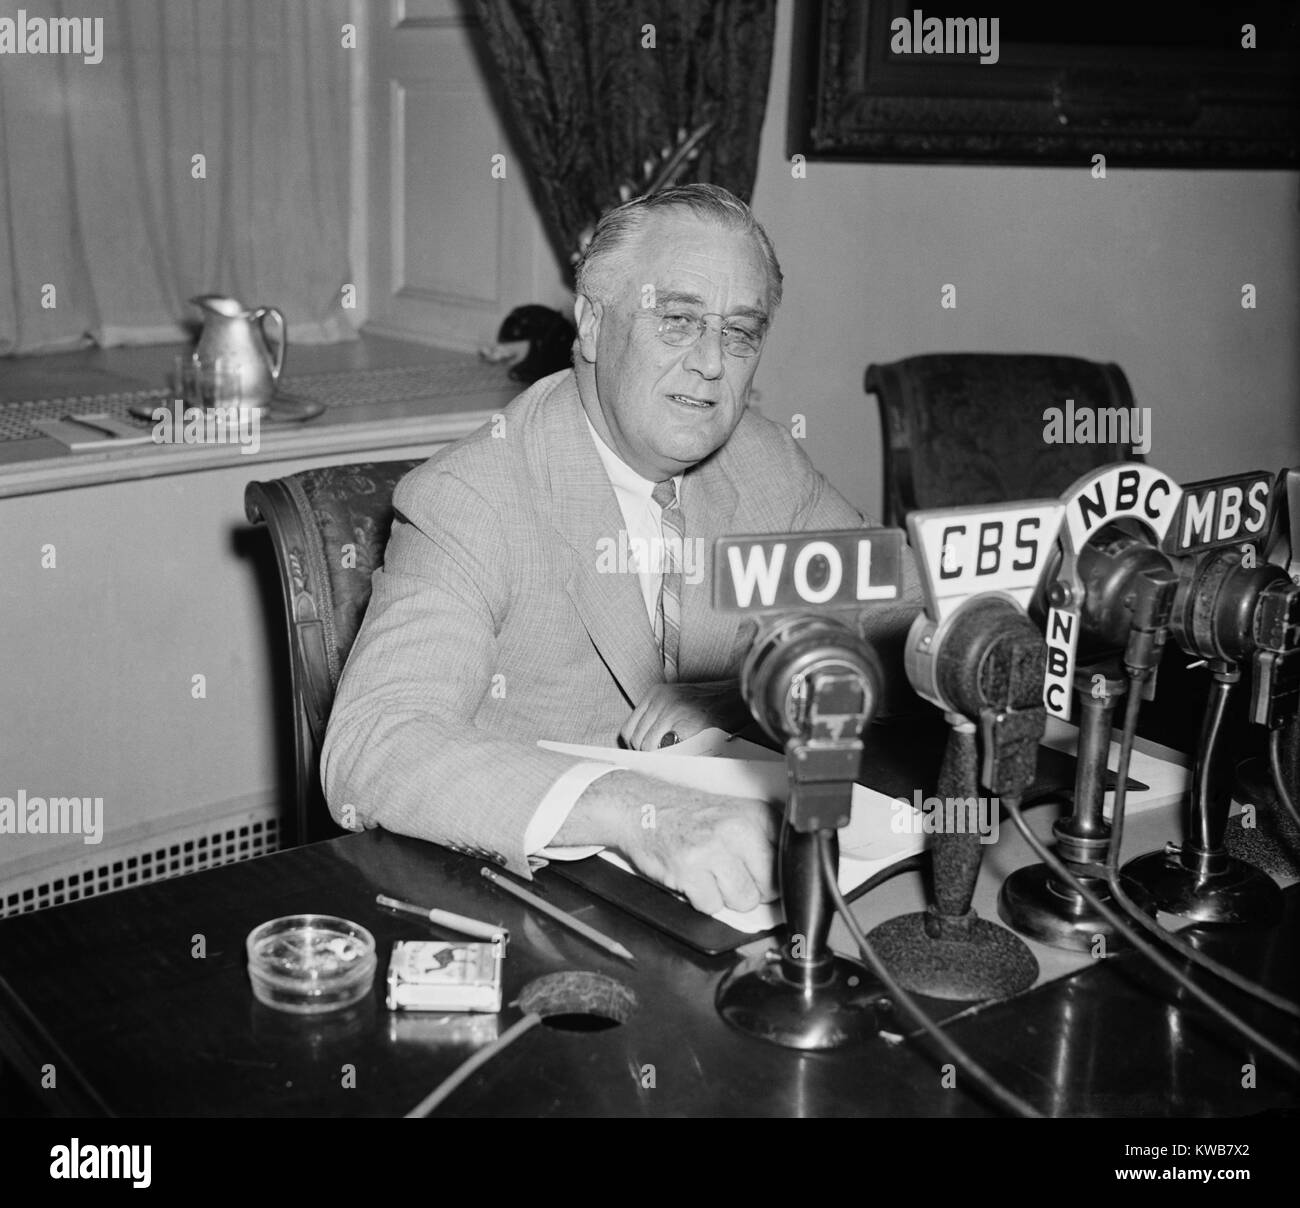 President Roosevelt broadcasting a 'Fireside Chat' on May 26, 1940. He spoke of the World situation as Nazi armies advanced through Western Europe and of U.S. defense plans. He attacked isolationists, as 'the Trojan Horse and the Fifth Column that betrays a nation unprepared for treachery'. World War 2. (BSLOC 2014 8 186) Stock Photo